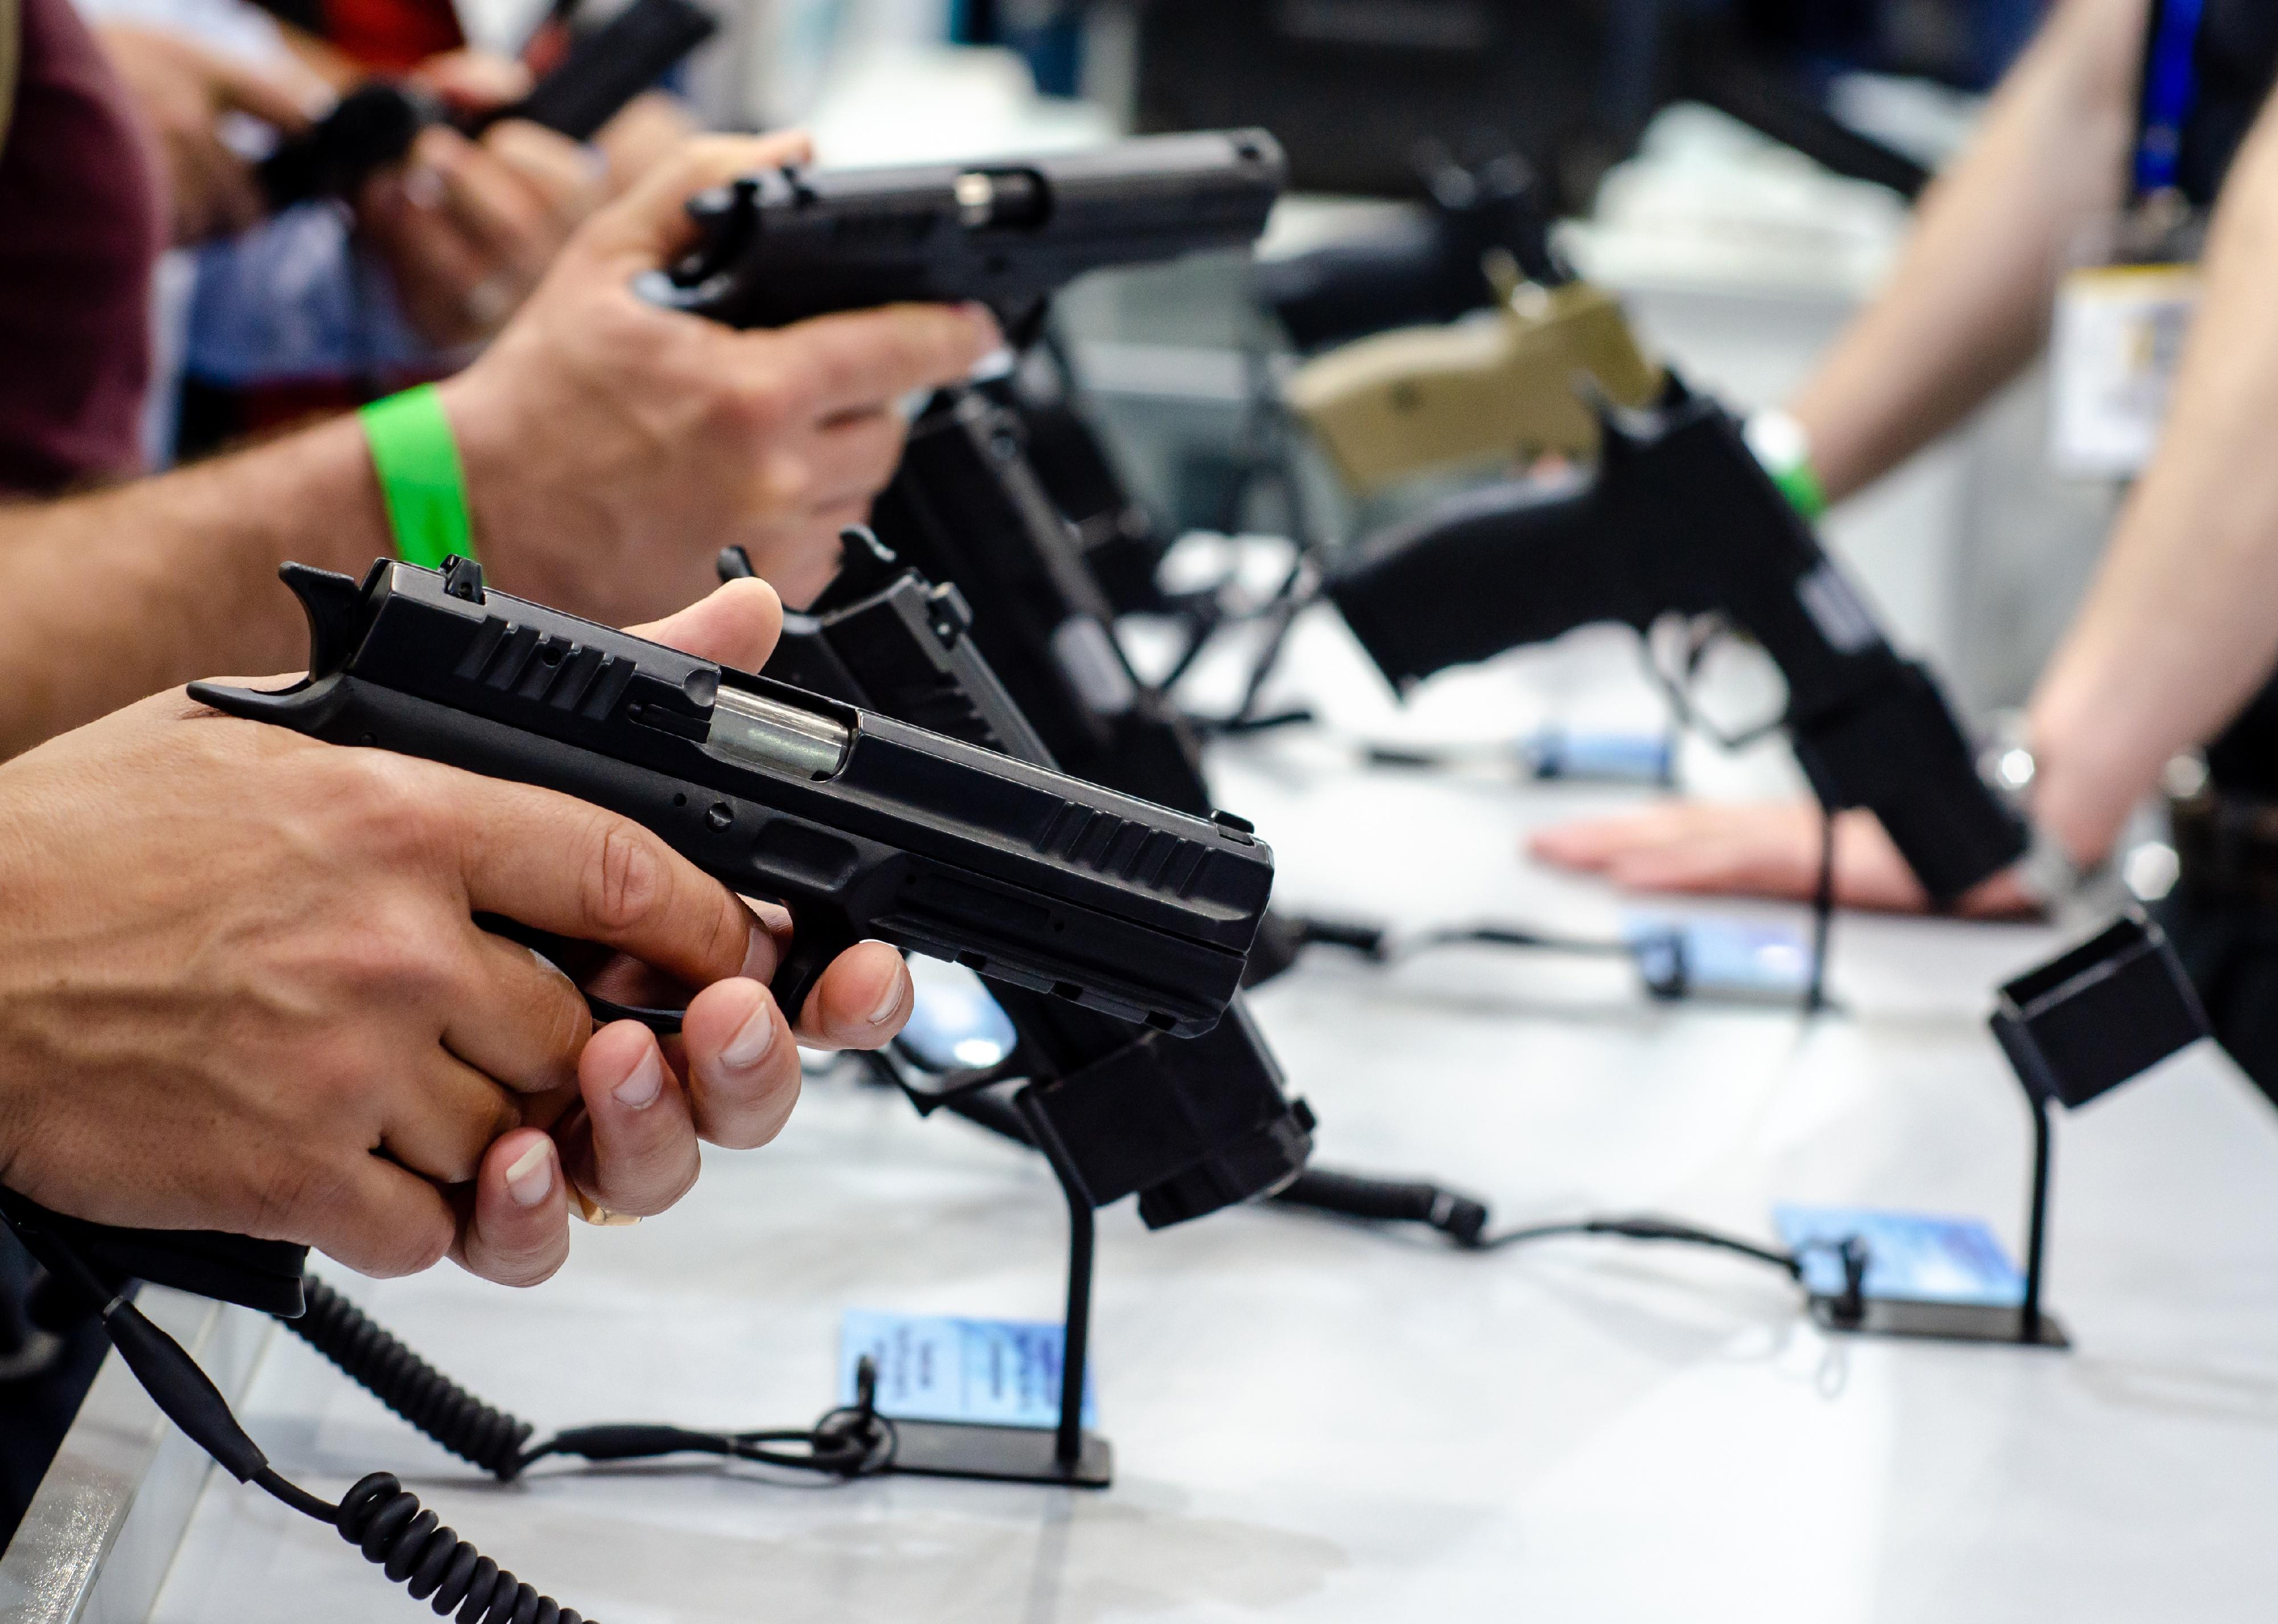 A row of hands holding guns in a store.